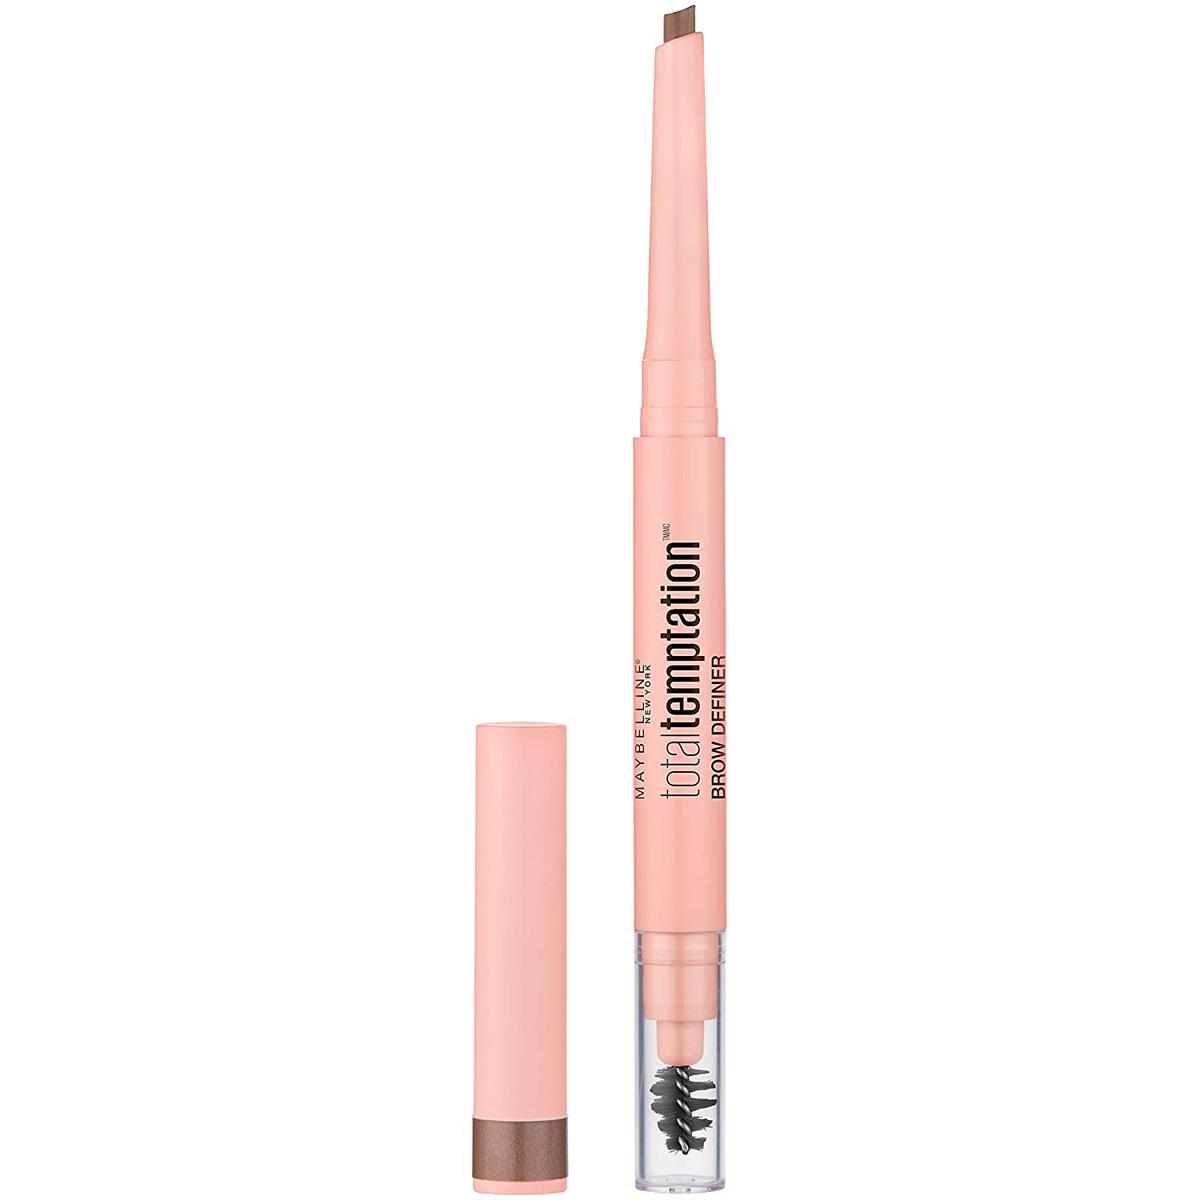 Maybelline Total Temptation Eyebrow Definer Pencil for $2.84 Shipped